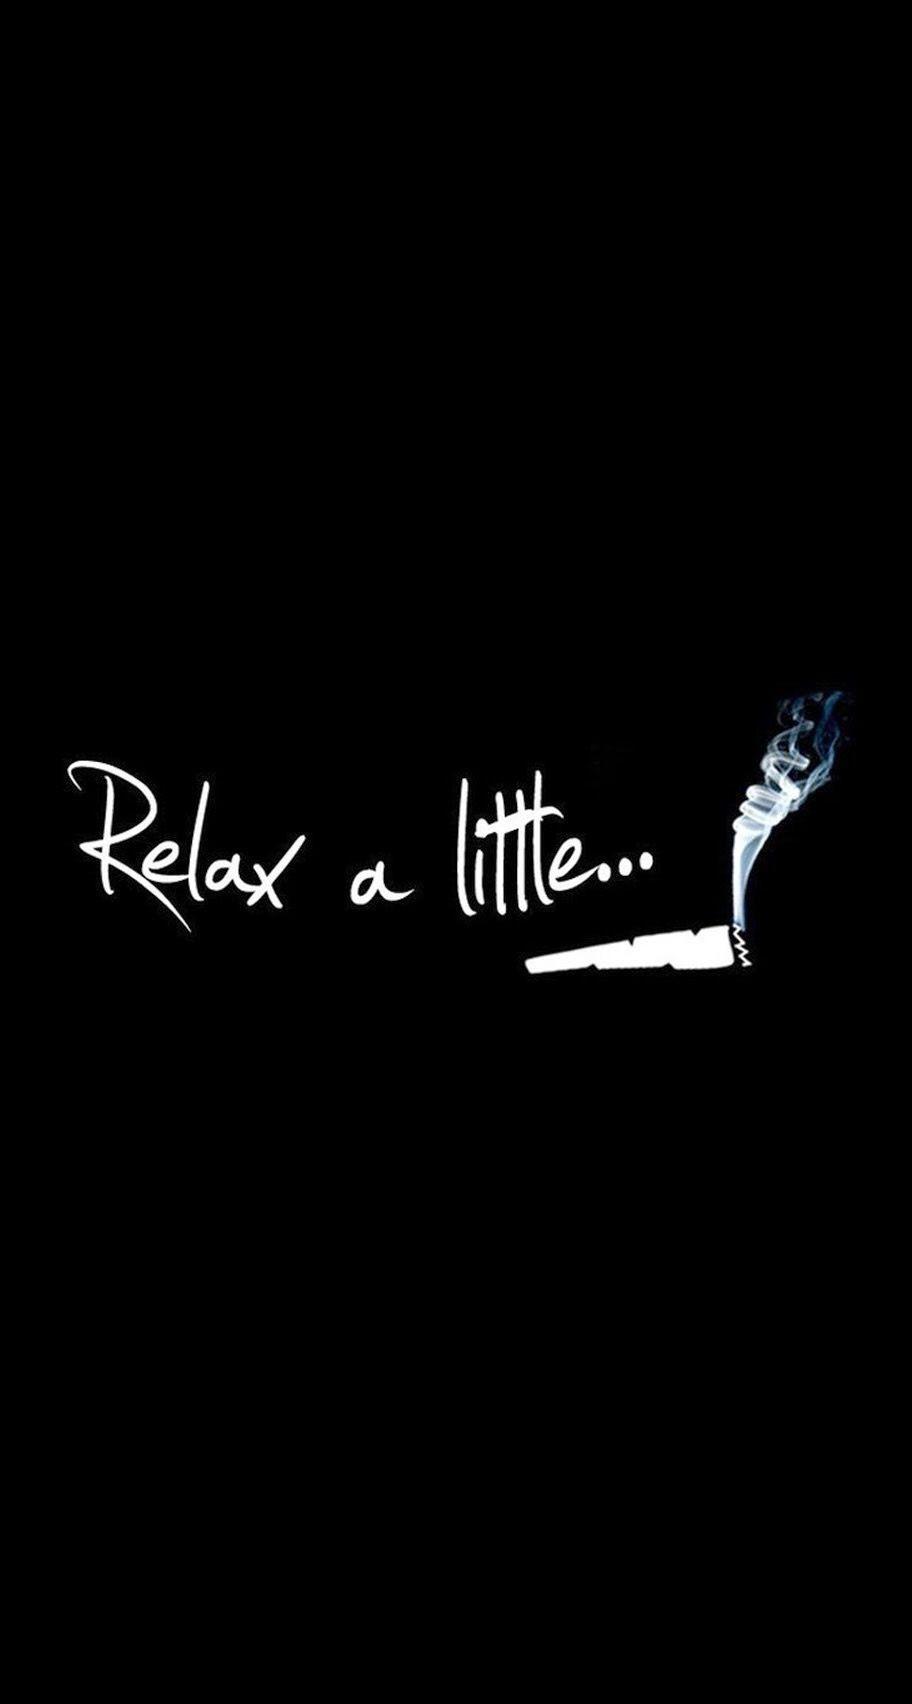 Relax A Little Smoke Weed iPhone 6 Plus HD Wallpaper HD